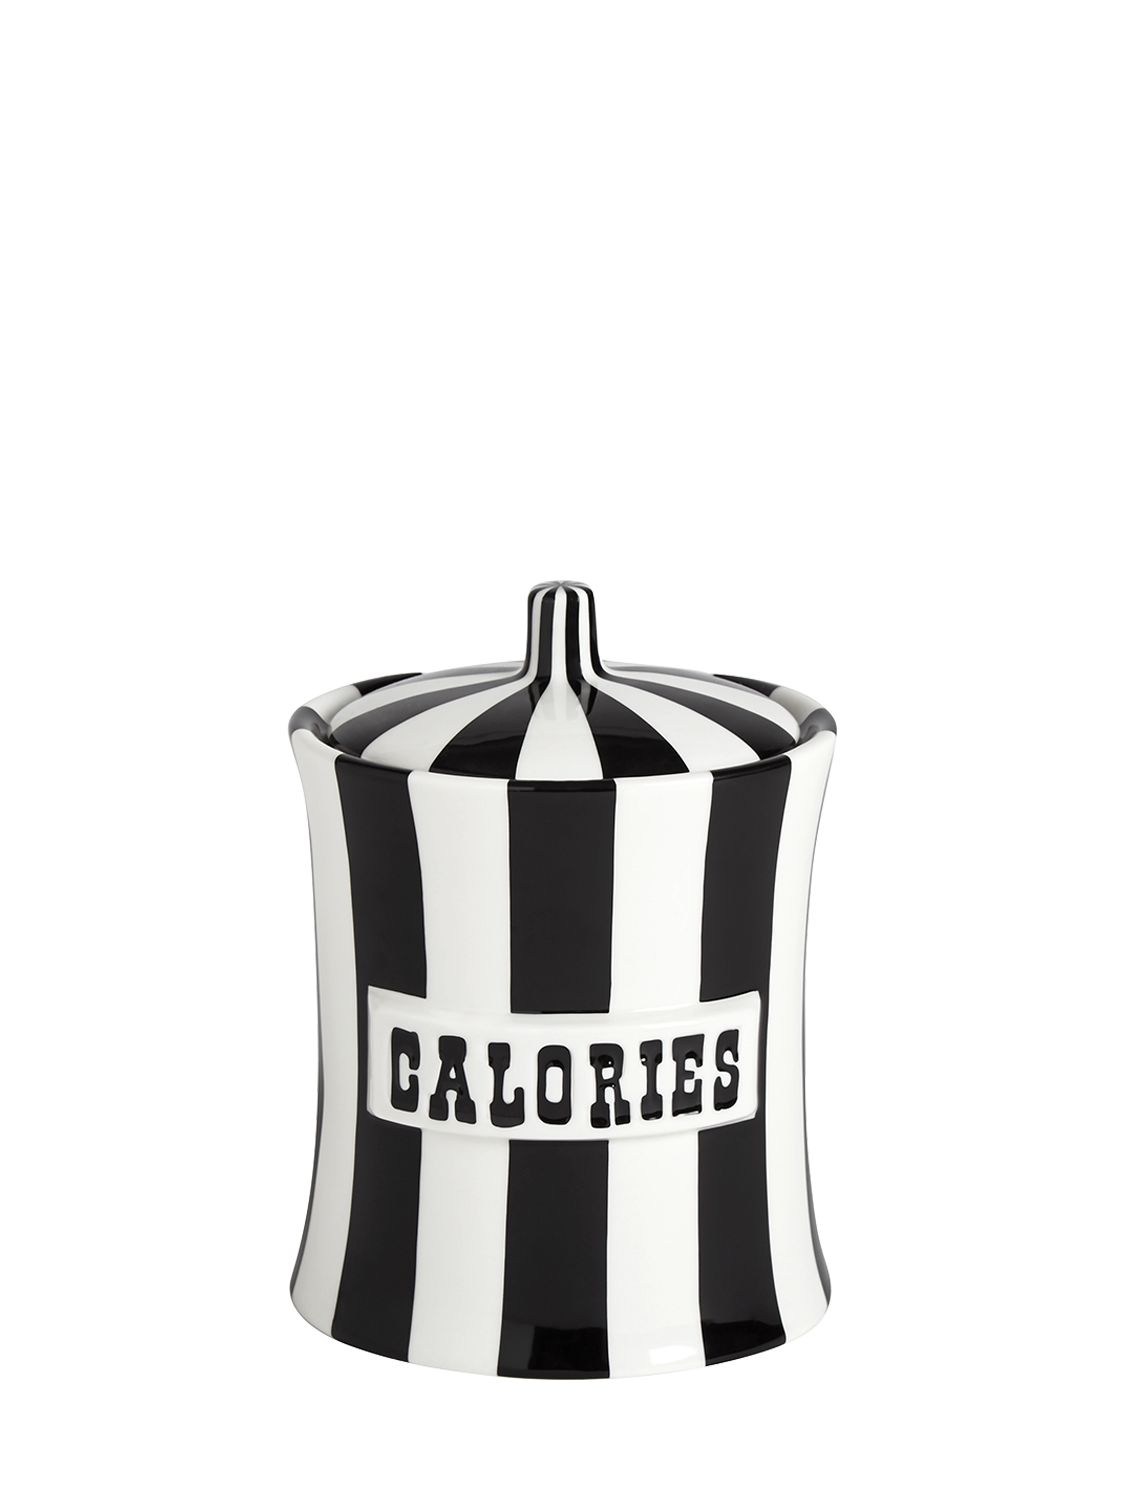 Jonathan Adler Vice Calories Canister In Black